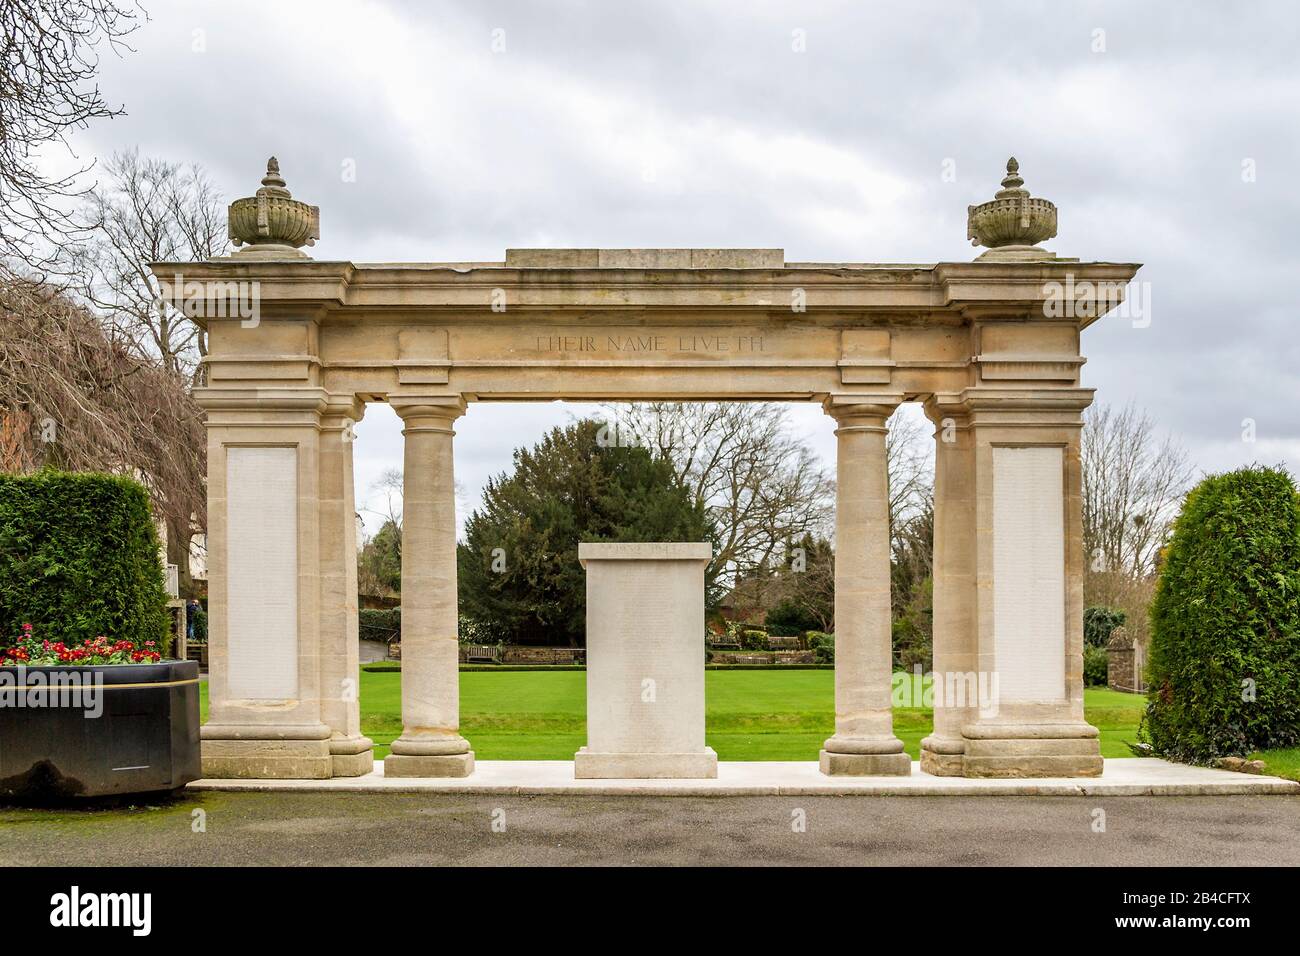 The large stone square archway of Guildford war memorial remembering those who lost their lives in the first and second world wars. Stock Photo